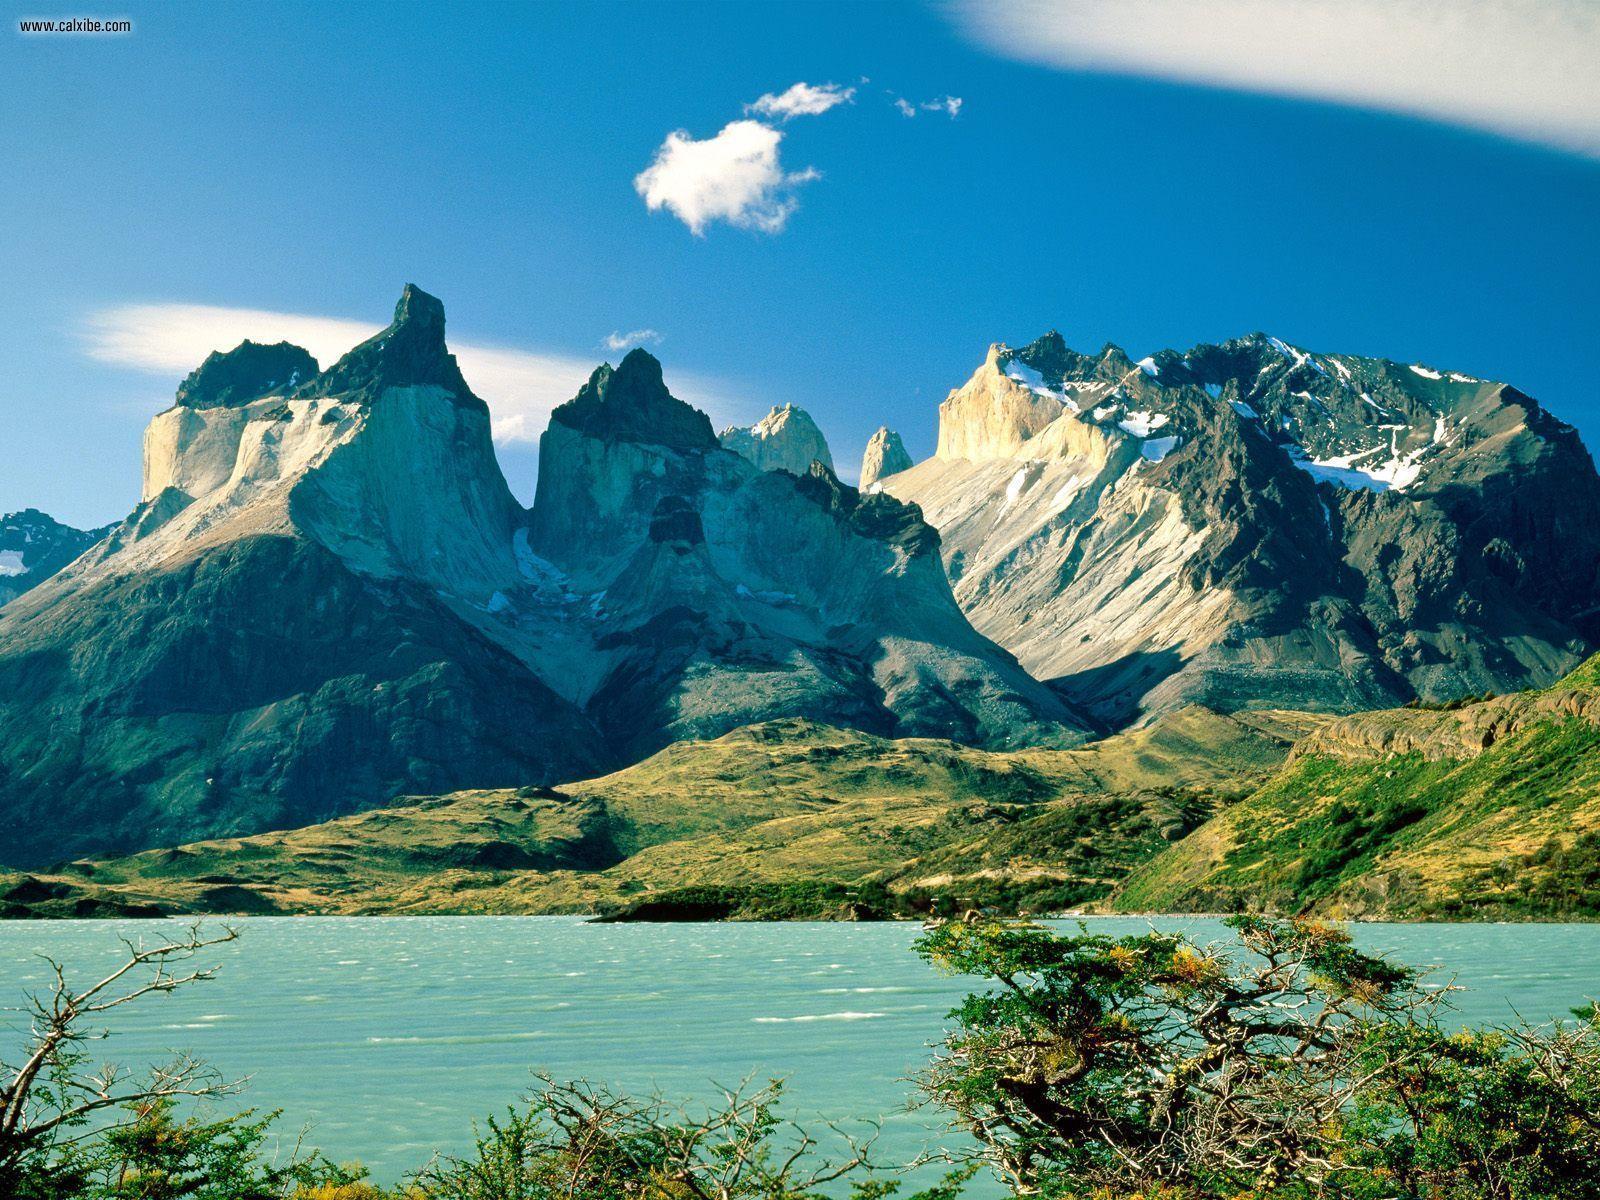 Nature: Torres Del Paine National Park Chile, picture nr. 21818